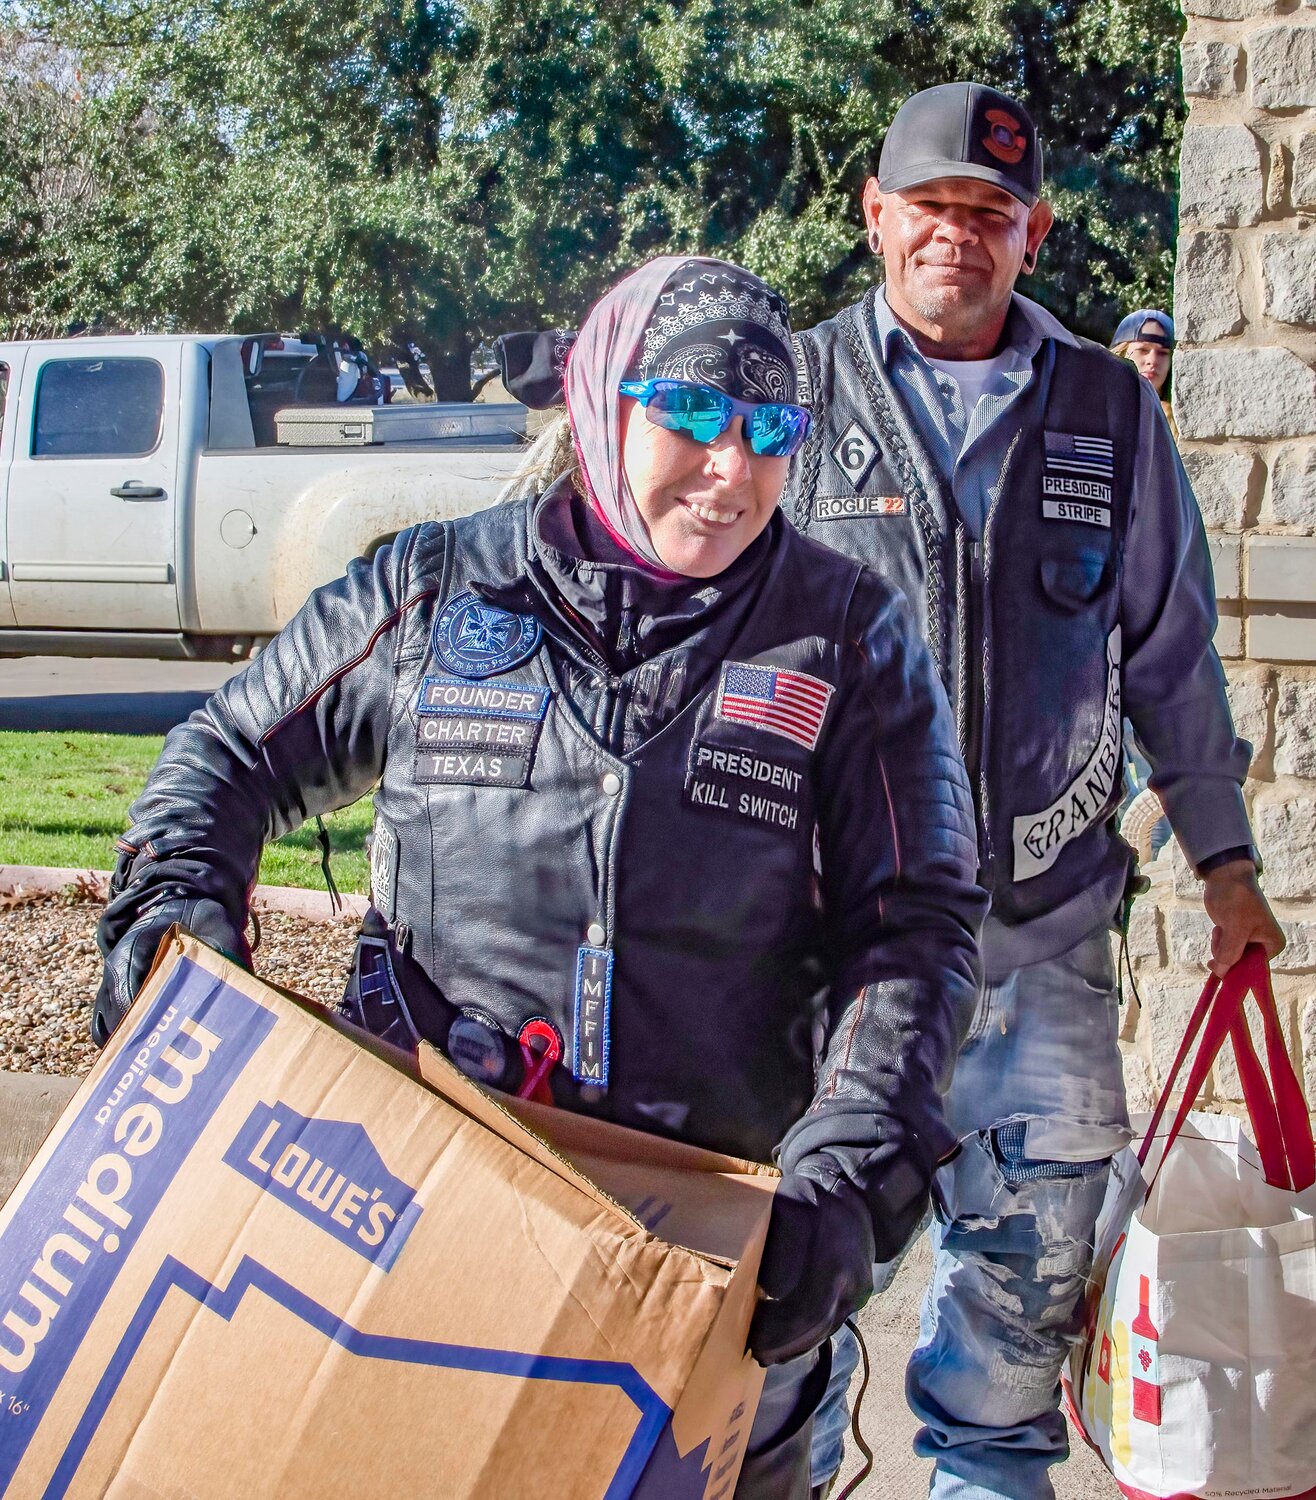 Dawn, front, and Jerry Perales, back, are a husband-and-wife team who combine their motorcycle clubs Iron Maidens and Rogue 22 MC every year to donate Christmas presents to local nursing home residents and staff.